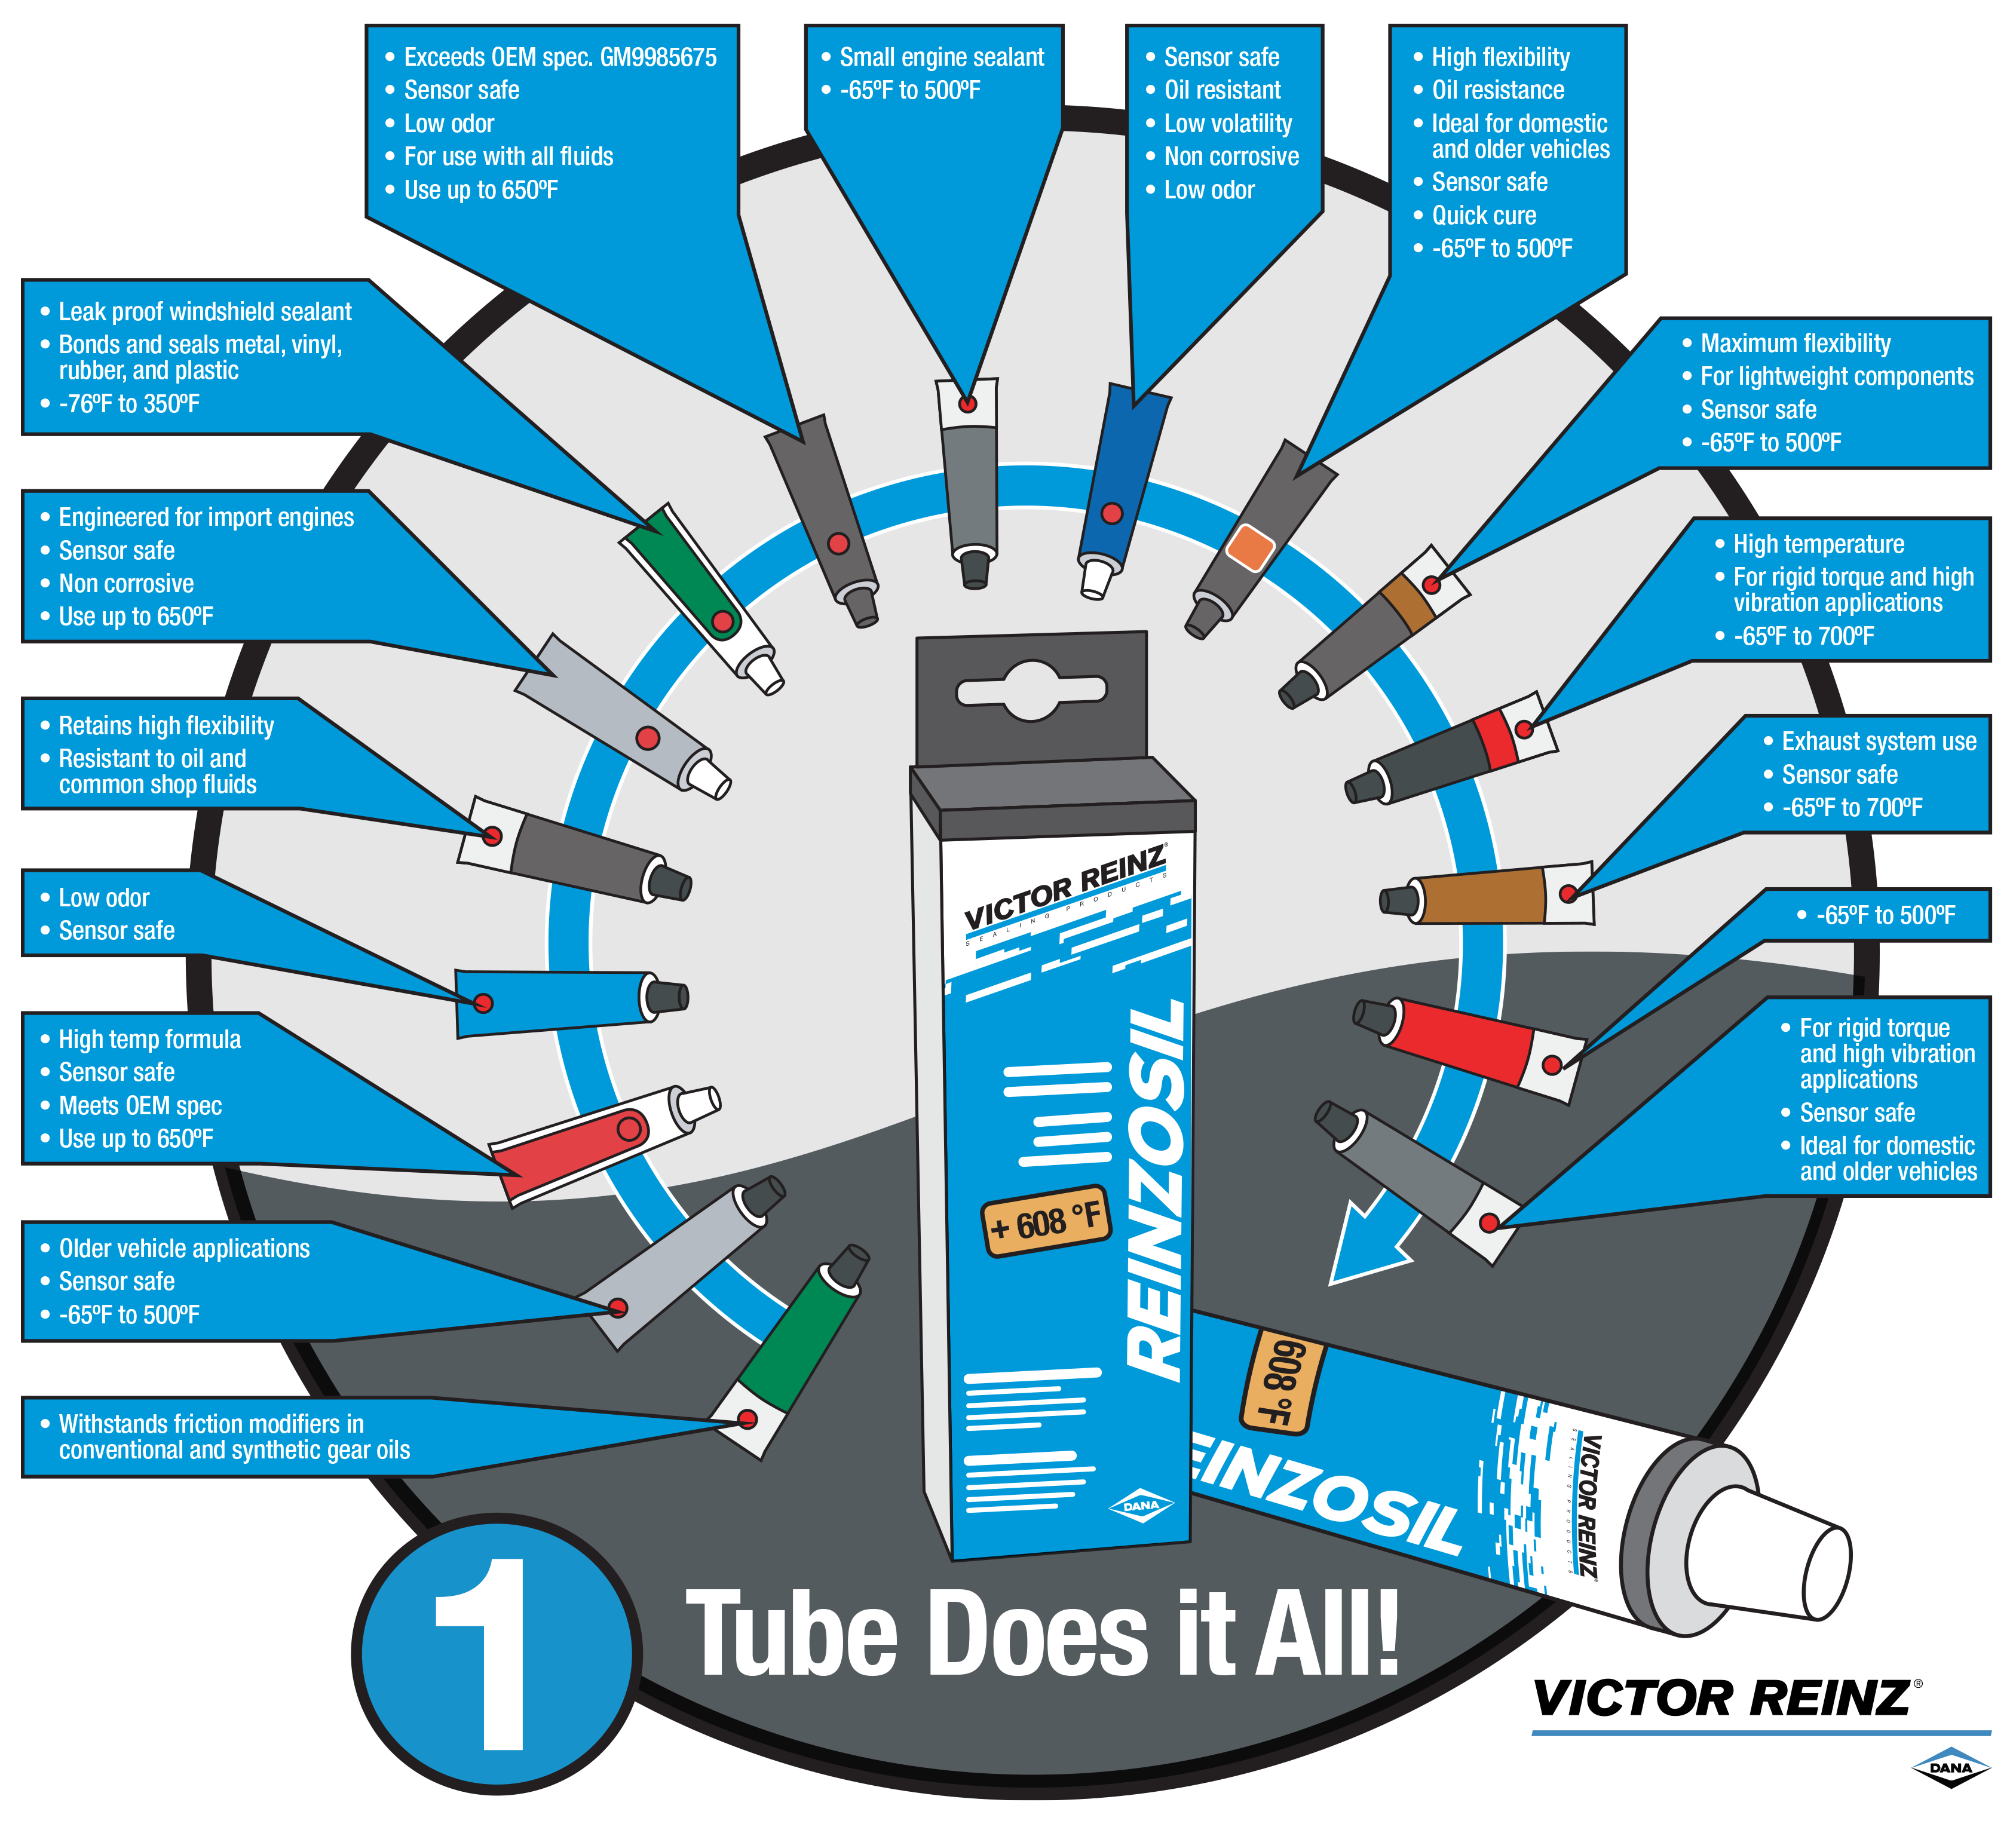 1 Tube Does it All!